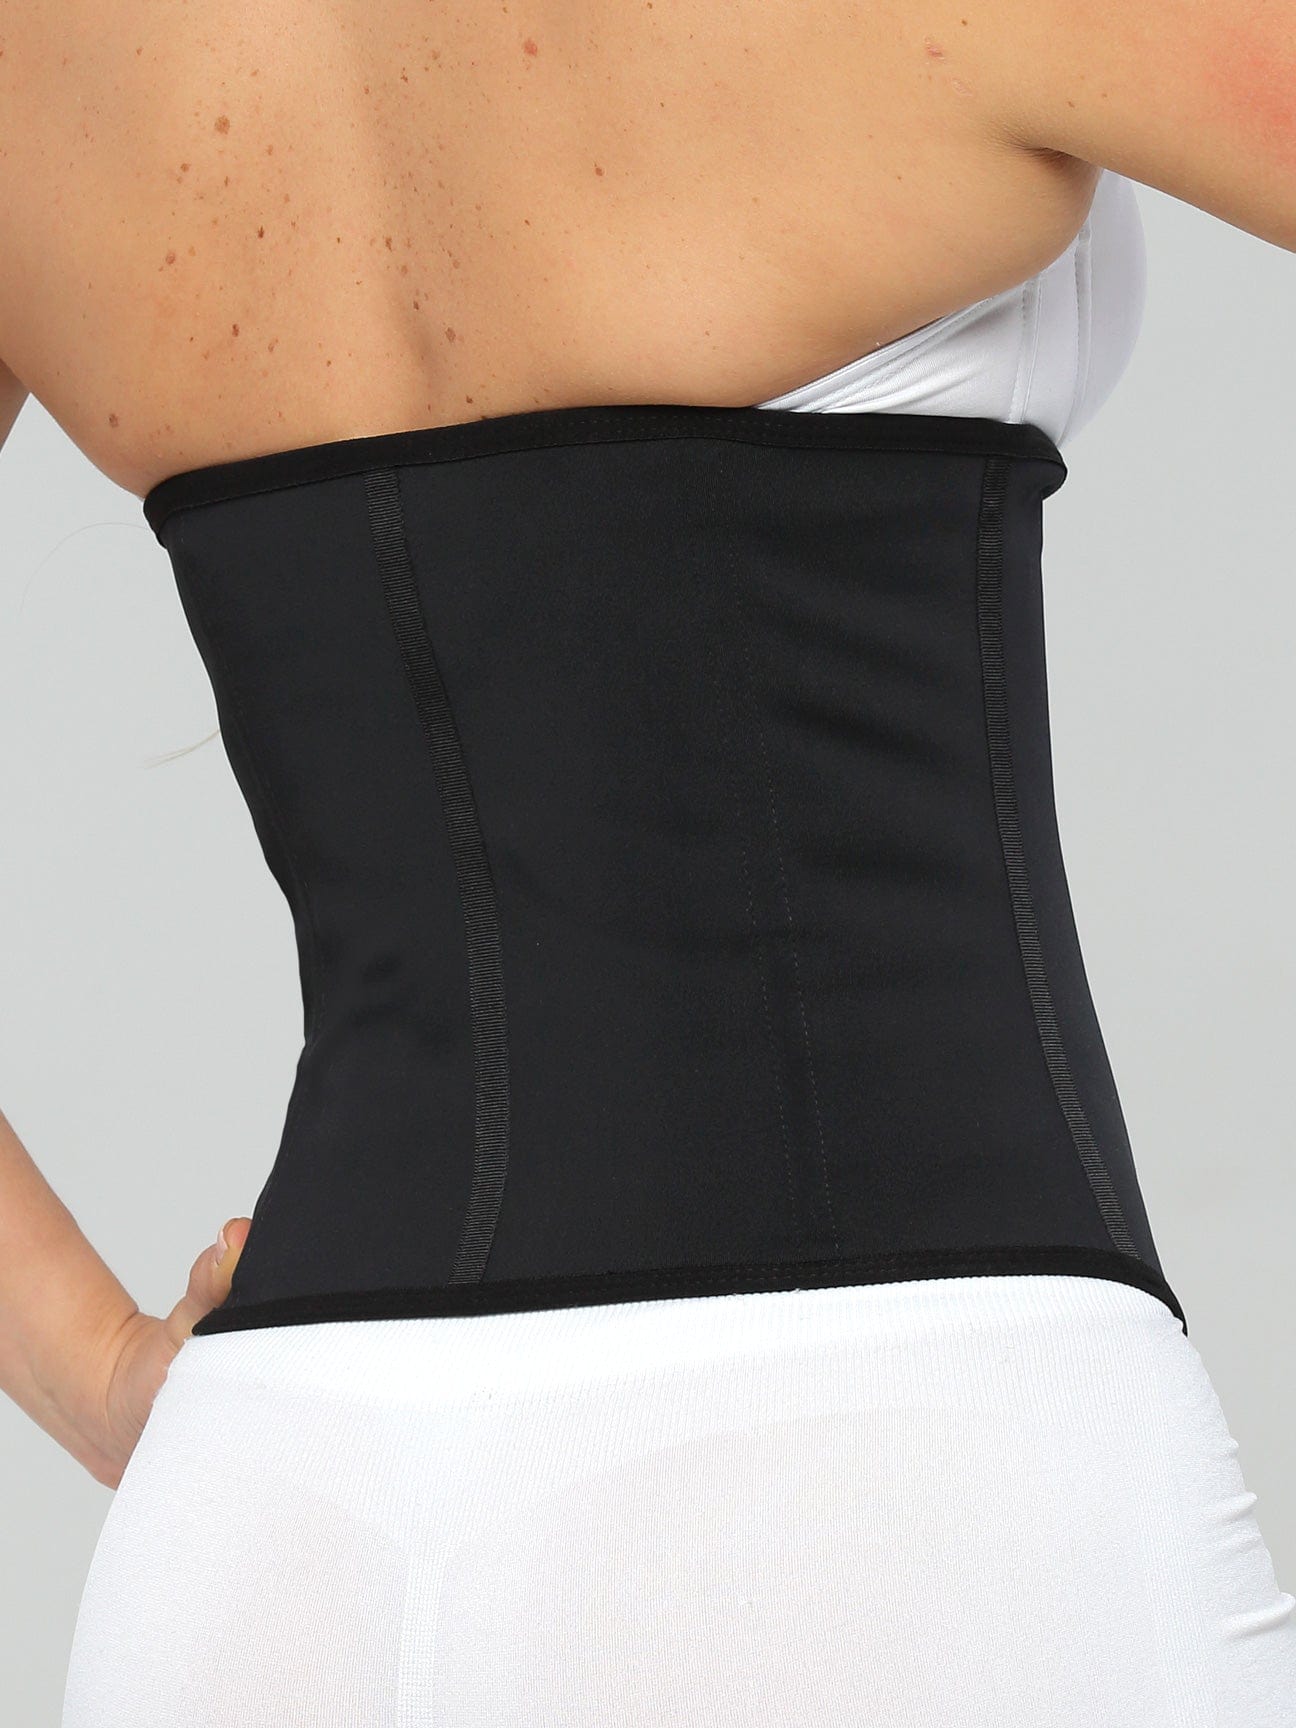 Waist Trainers for sale in Cortes Bay, British Columbia